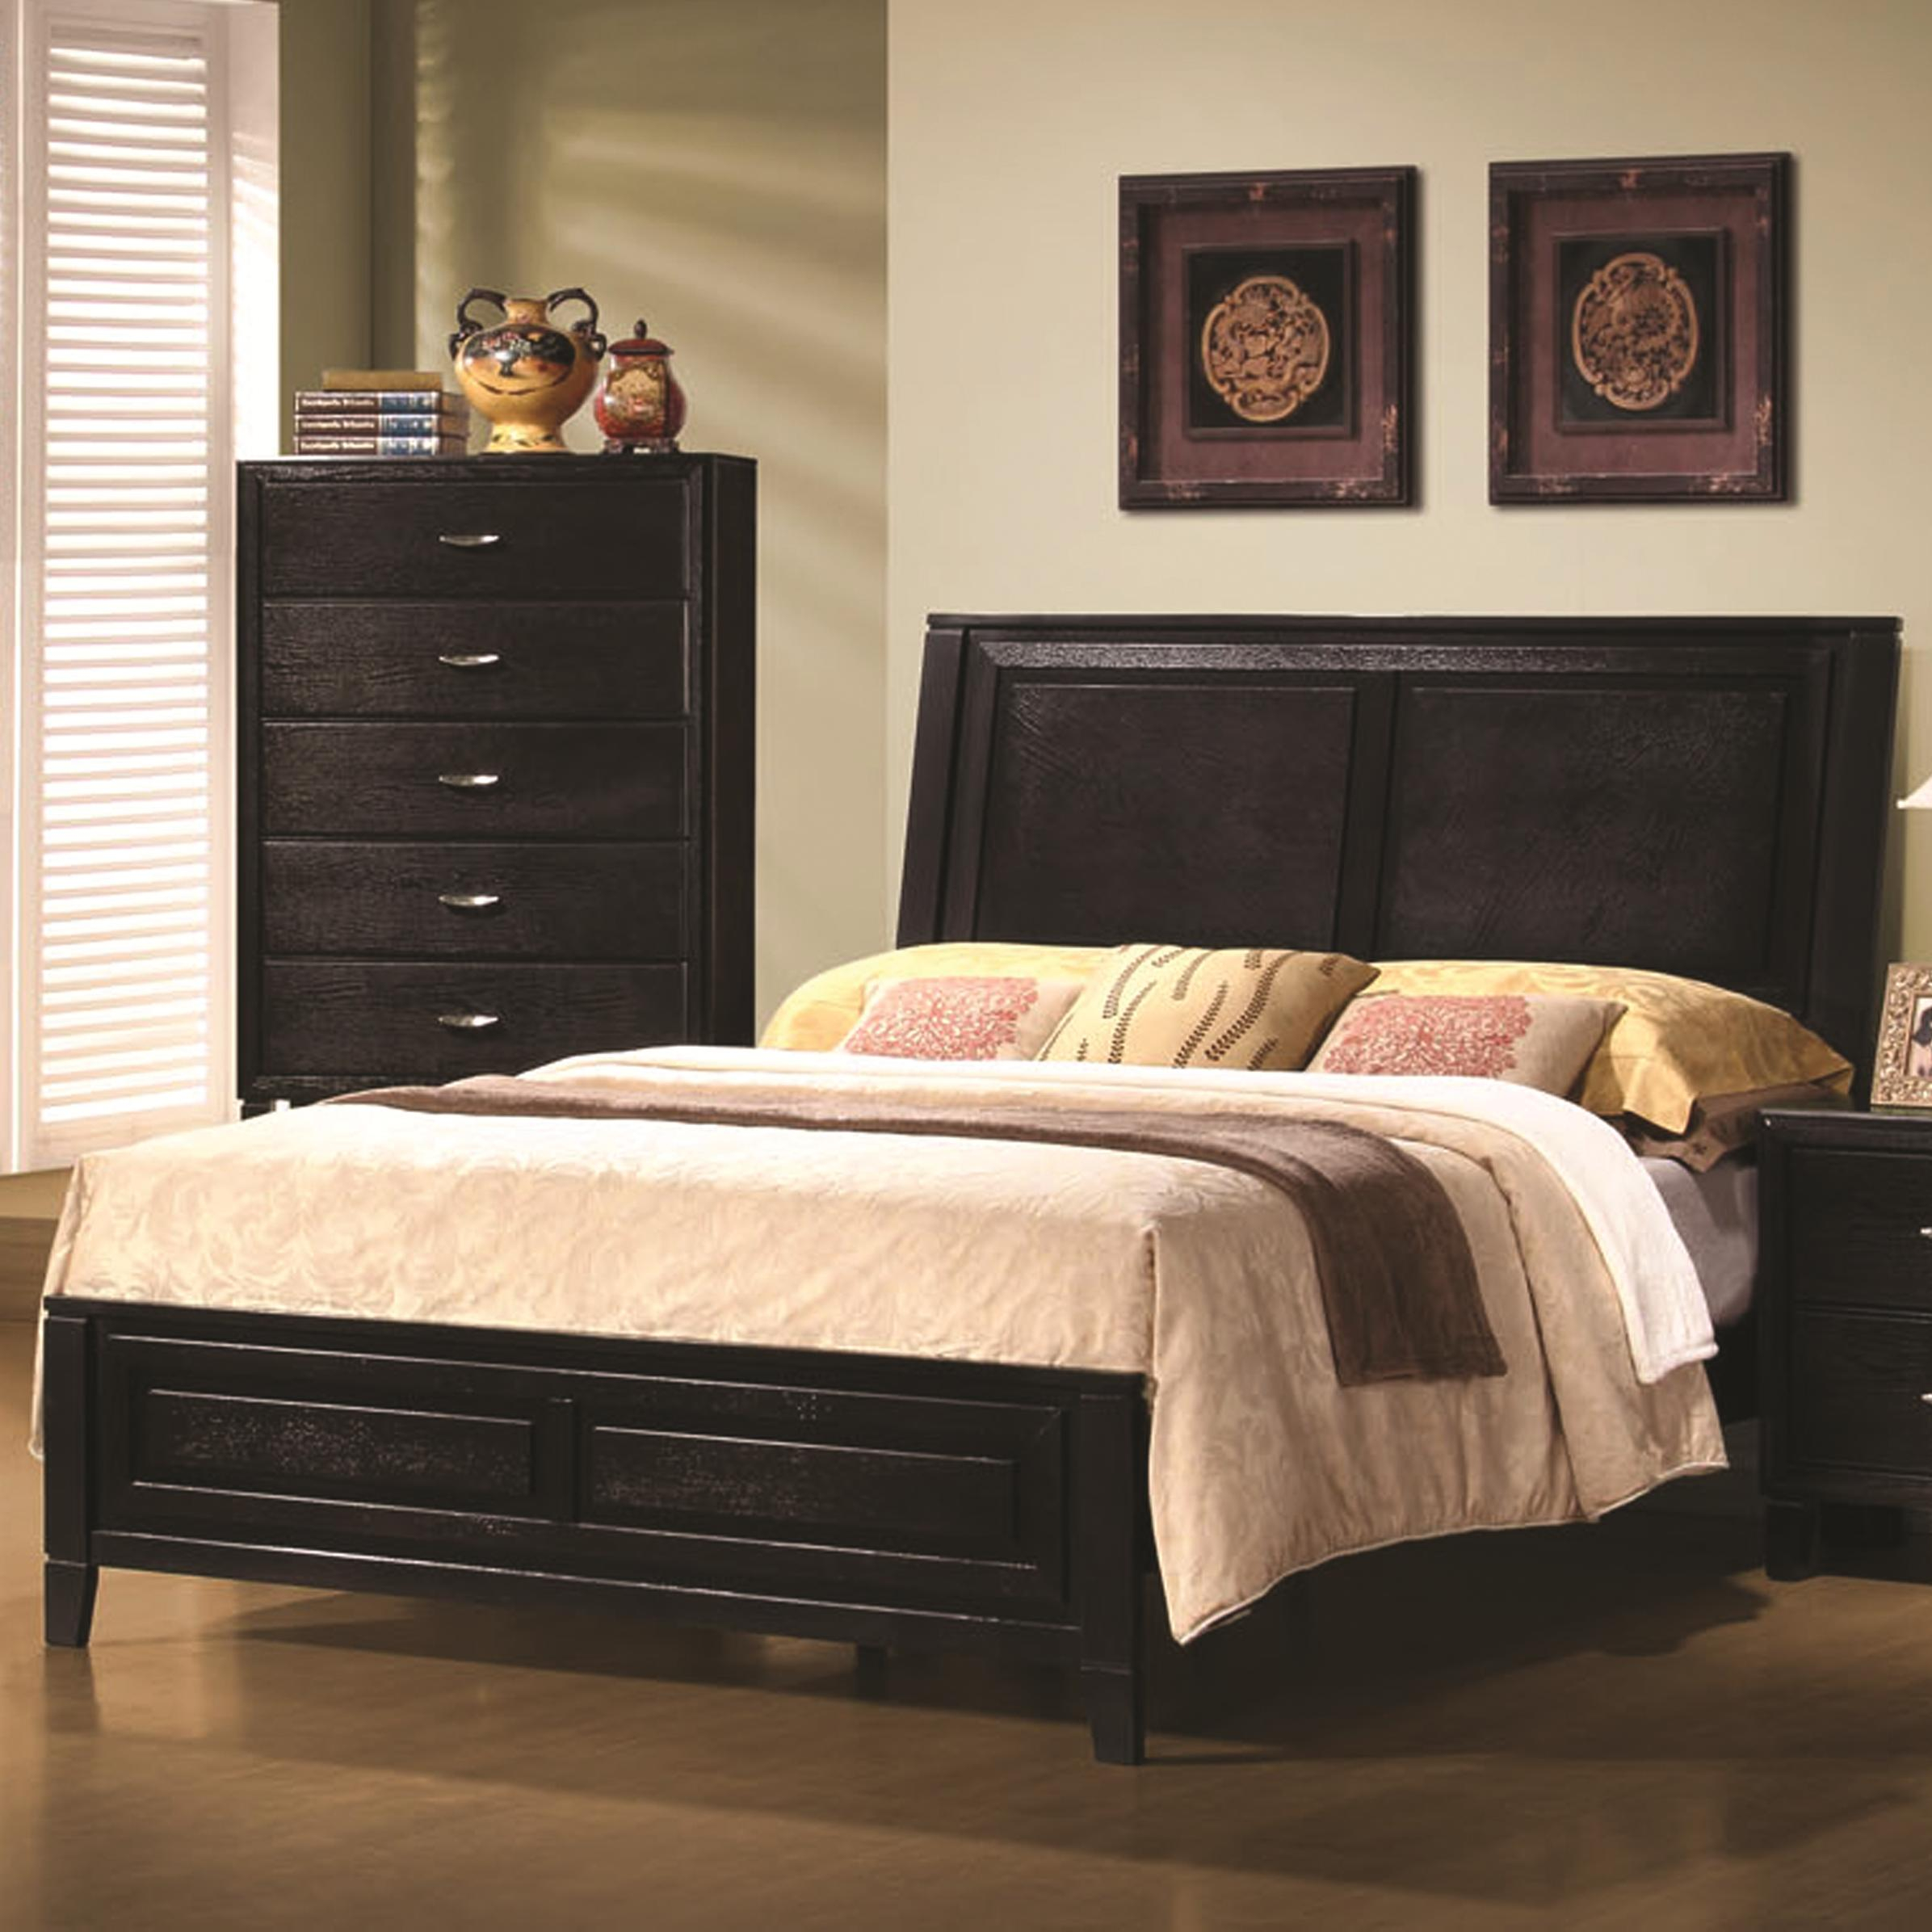 Nacey Queen Contemporary Headboard And Footboard Bed Coaster At Value City Furniture intended for proportions 2392 X 2392